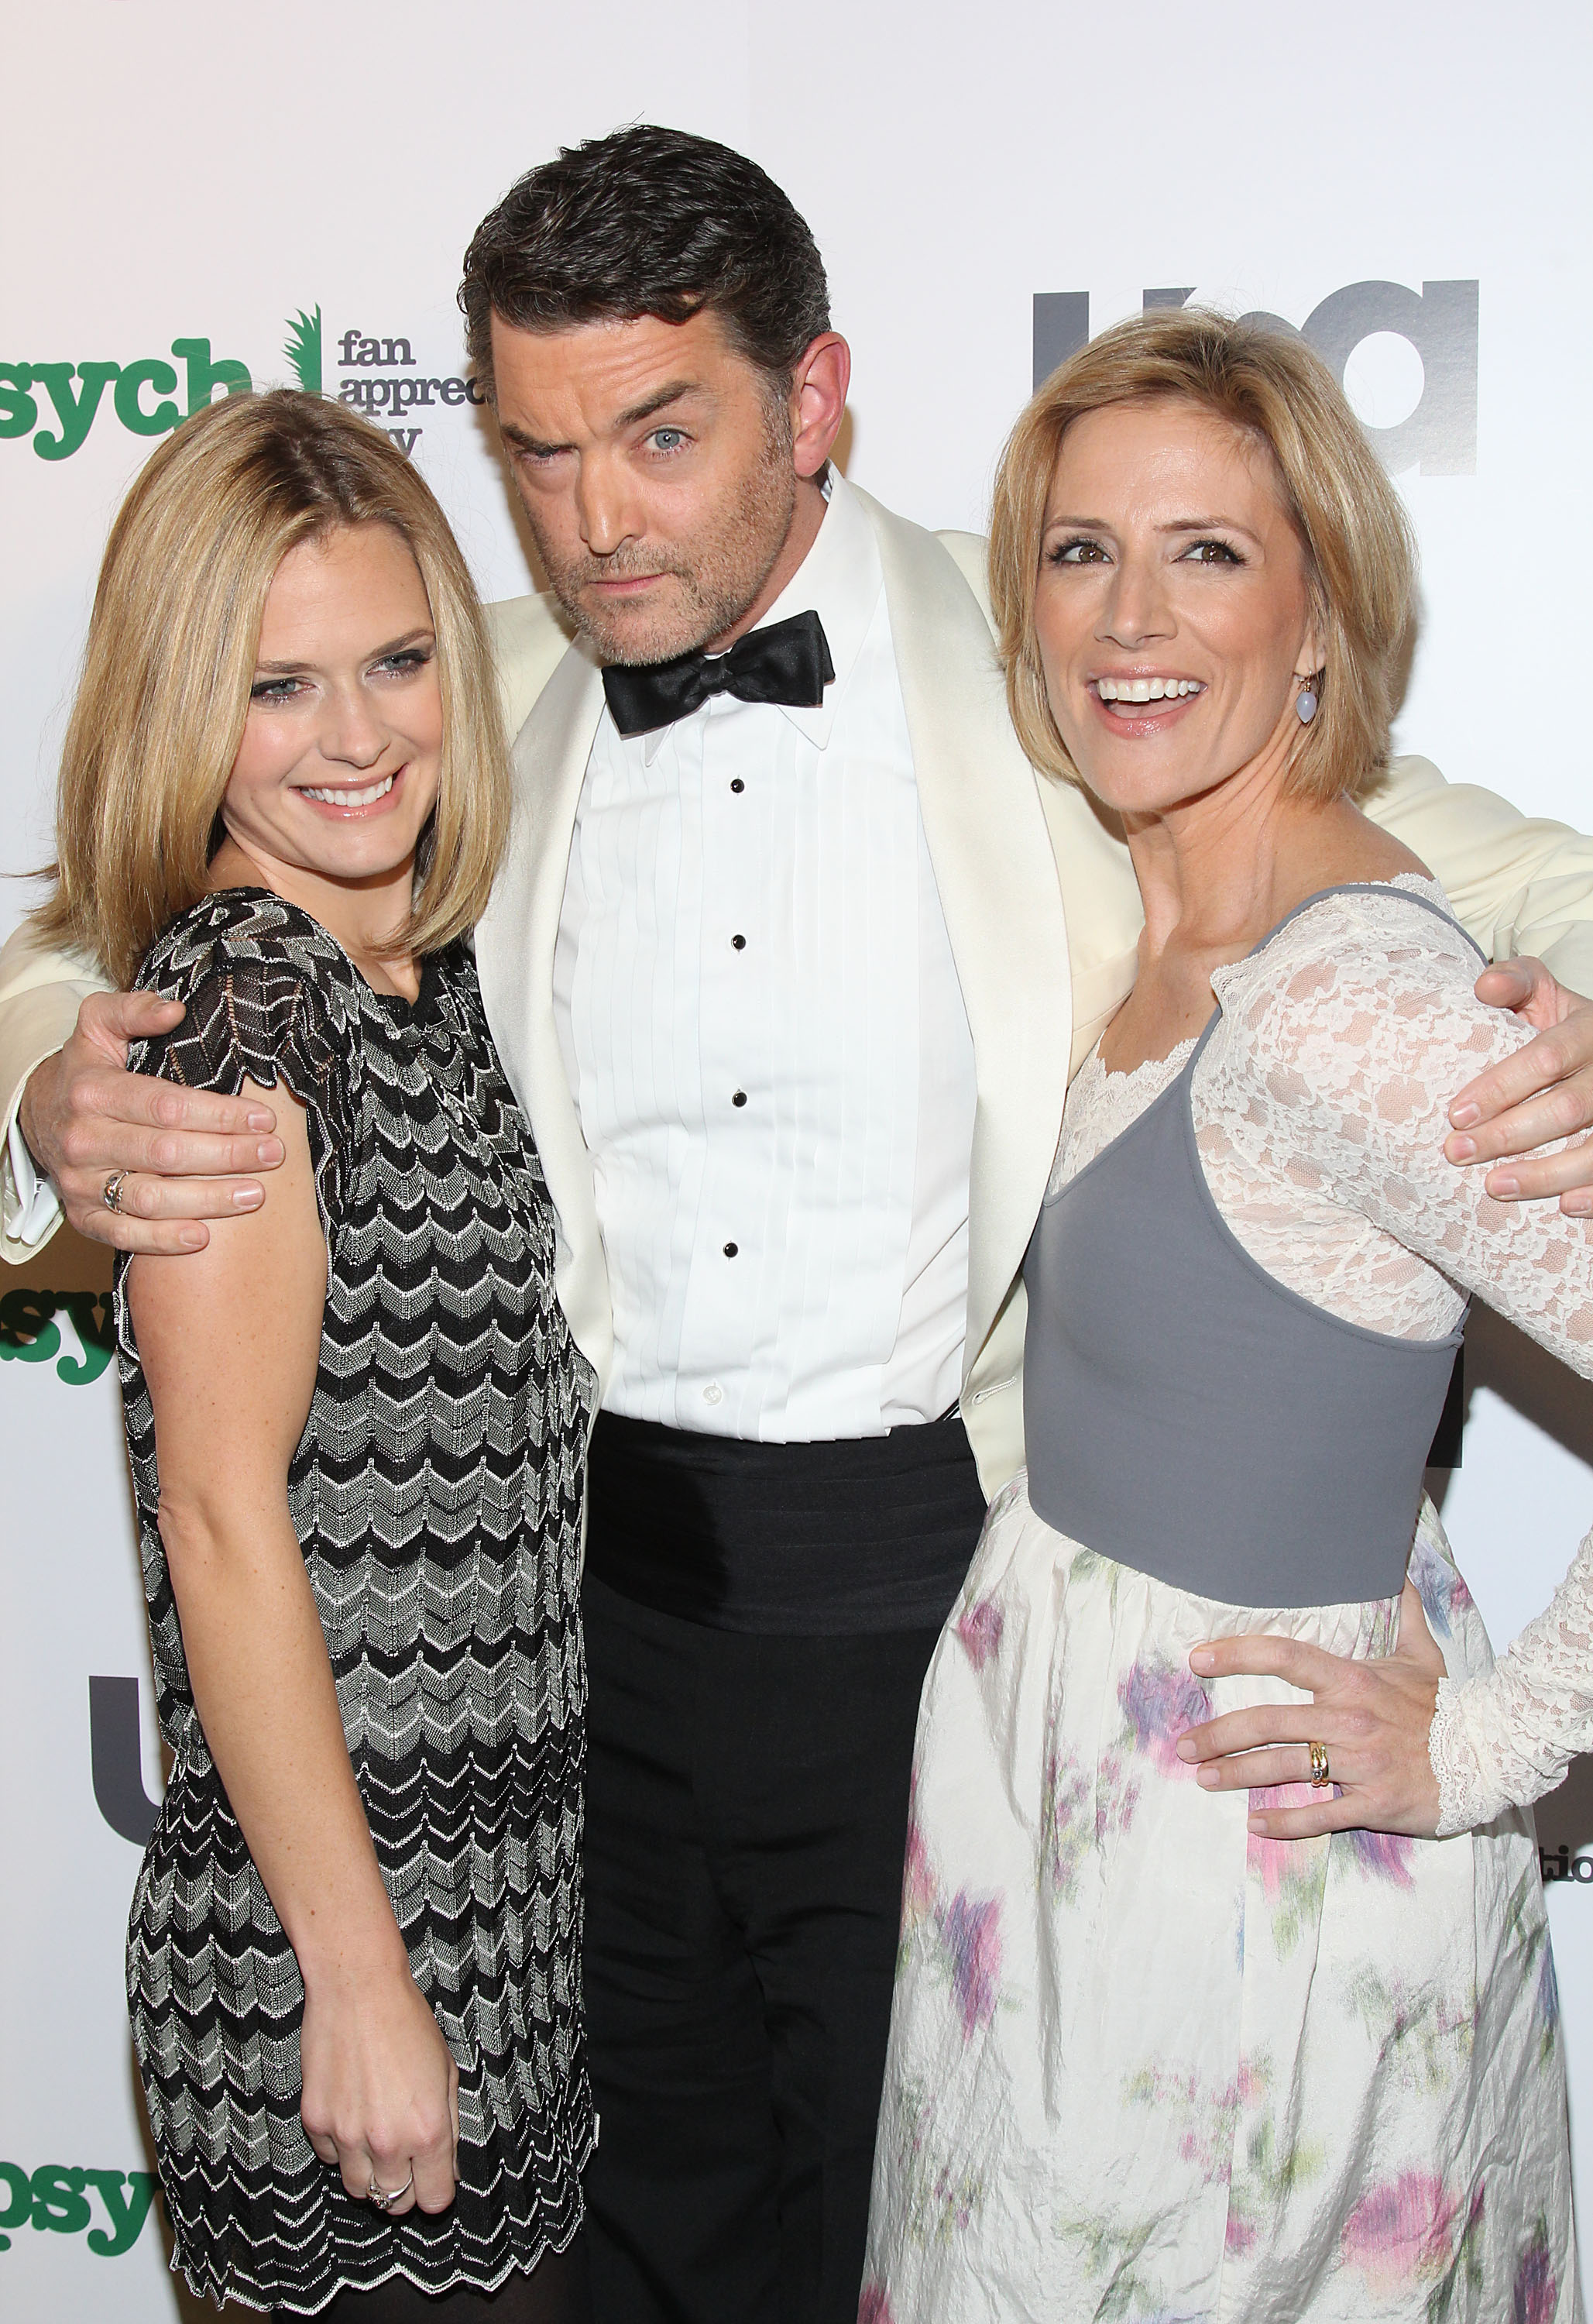 NYC, NY - 06 Oct 2011 (L-R) Maggie Lawson, Timothy Omundson, Kirsten Nelson attend the PSYCH Season 6 premiere at the Ziegfeld Theatre in New York City